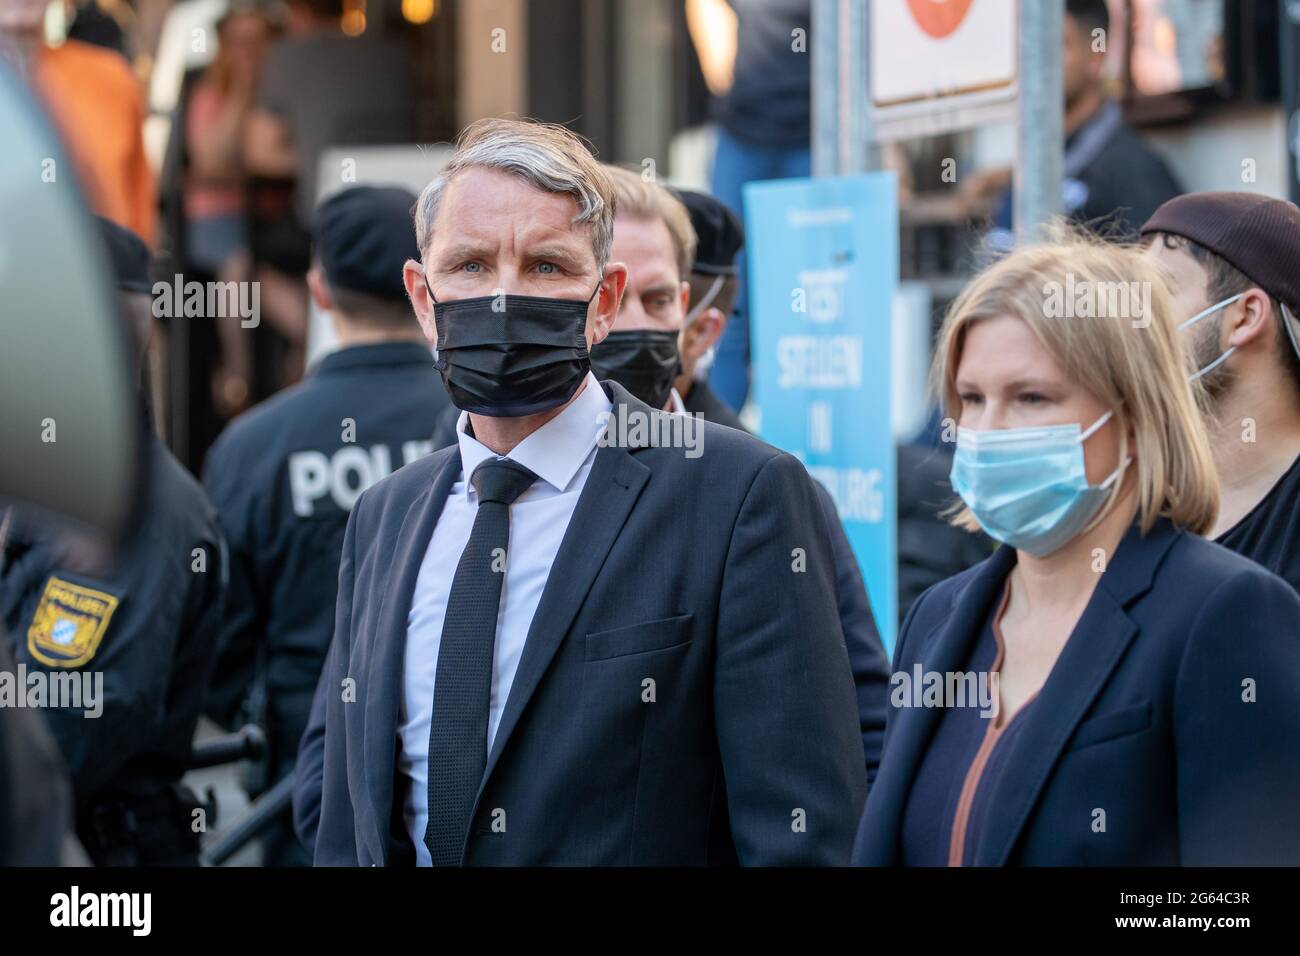 02 July 2021, Bavaria, Würzburg: Björn Höcke (AfD), leader of the AfD  parliamentary group in the Thuringian state parliament, and Katrin  Ebner-Steiner, leader of the AfD parliamentary group in the Bavarian state